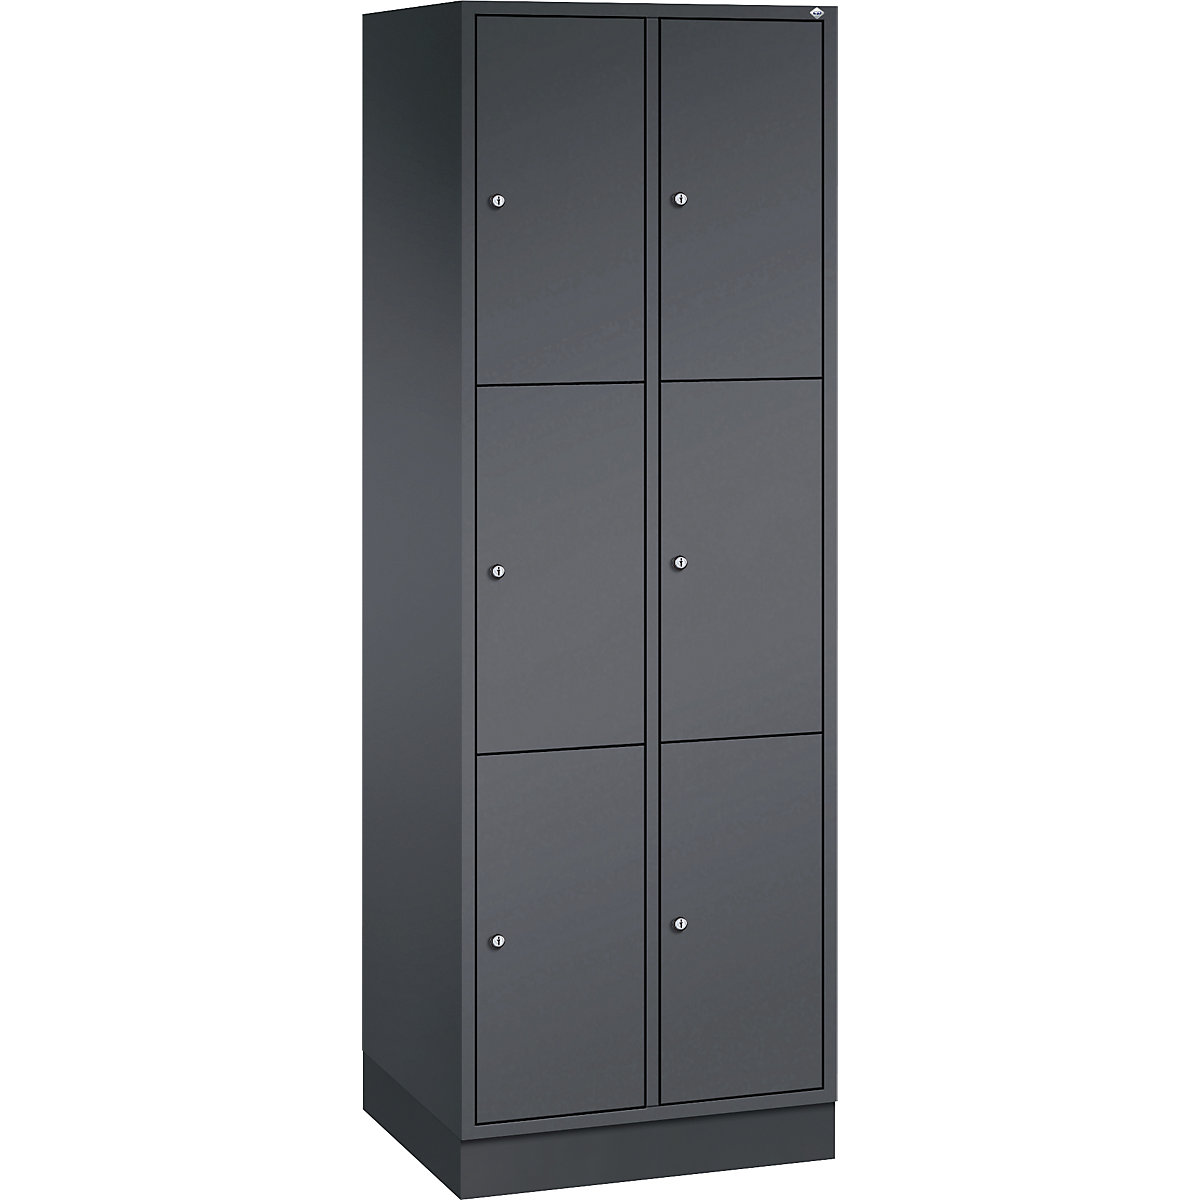 INTRO steel compartment locker, compartment height 580 mm – C+P, WxD 620 x 500 mm, 6 compartments, black grey body, black grey doors